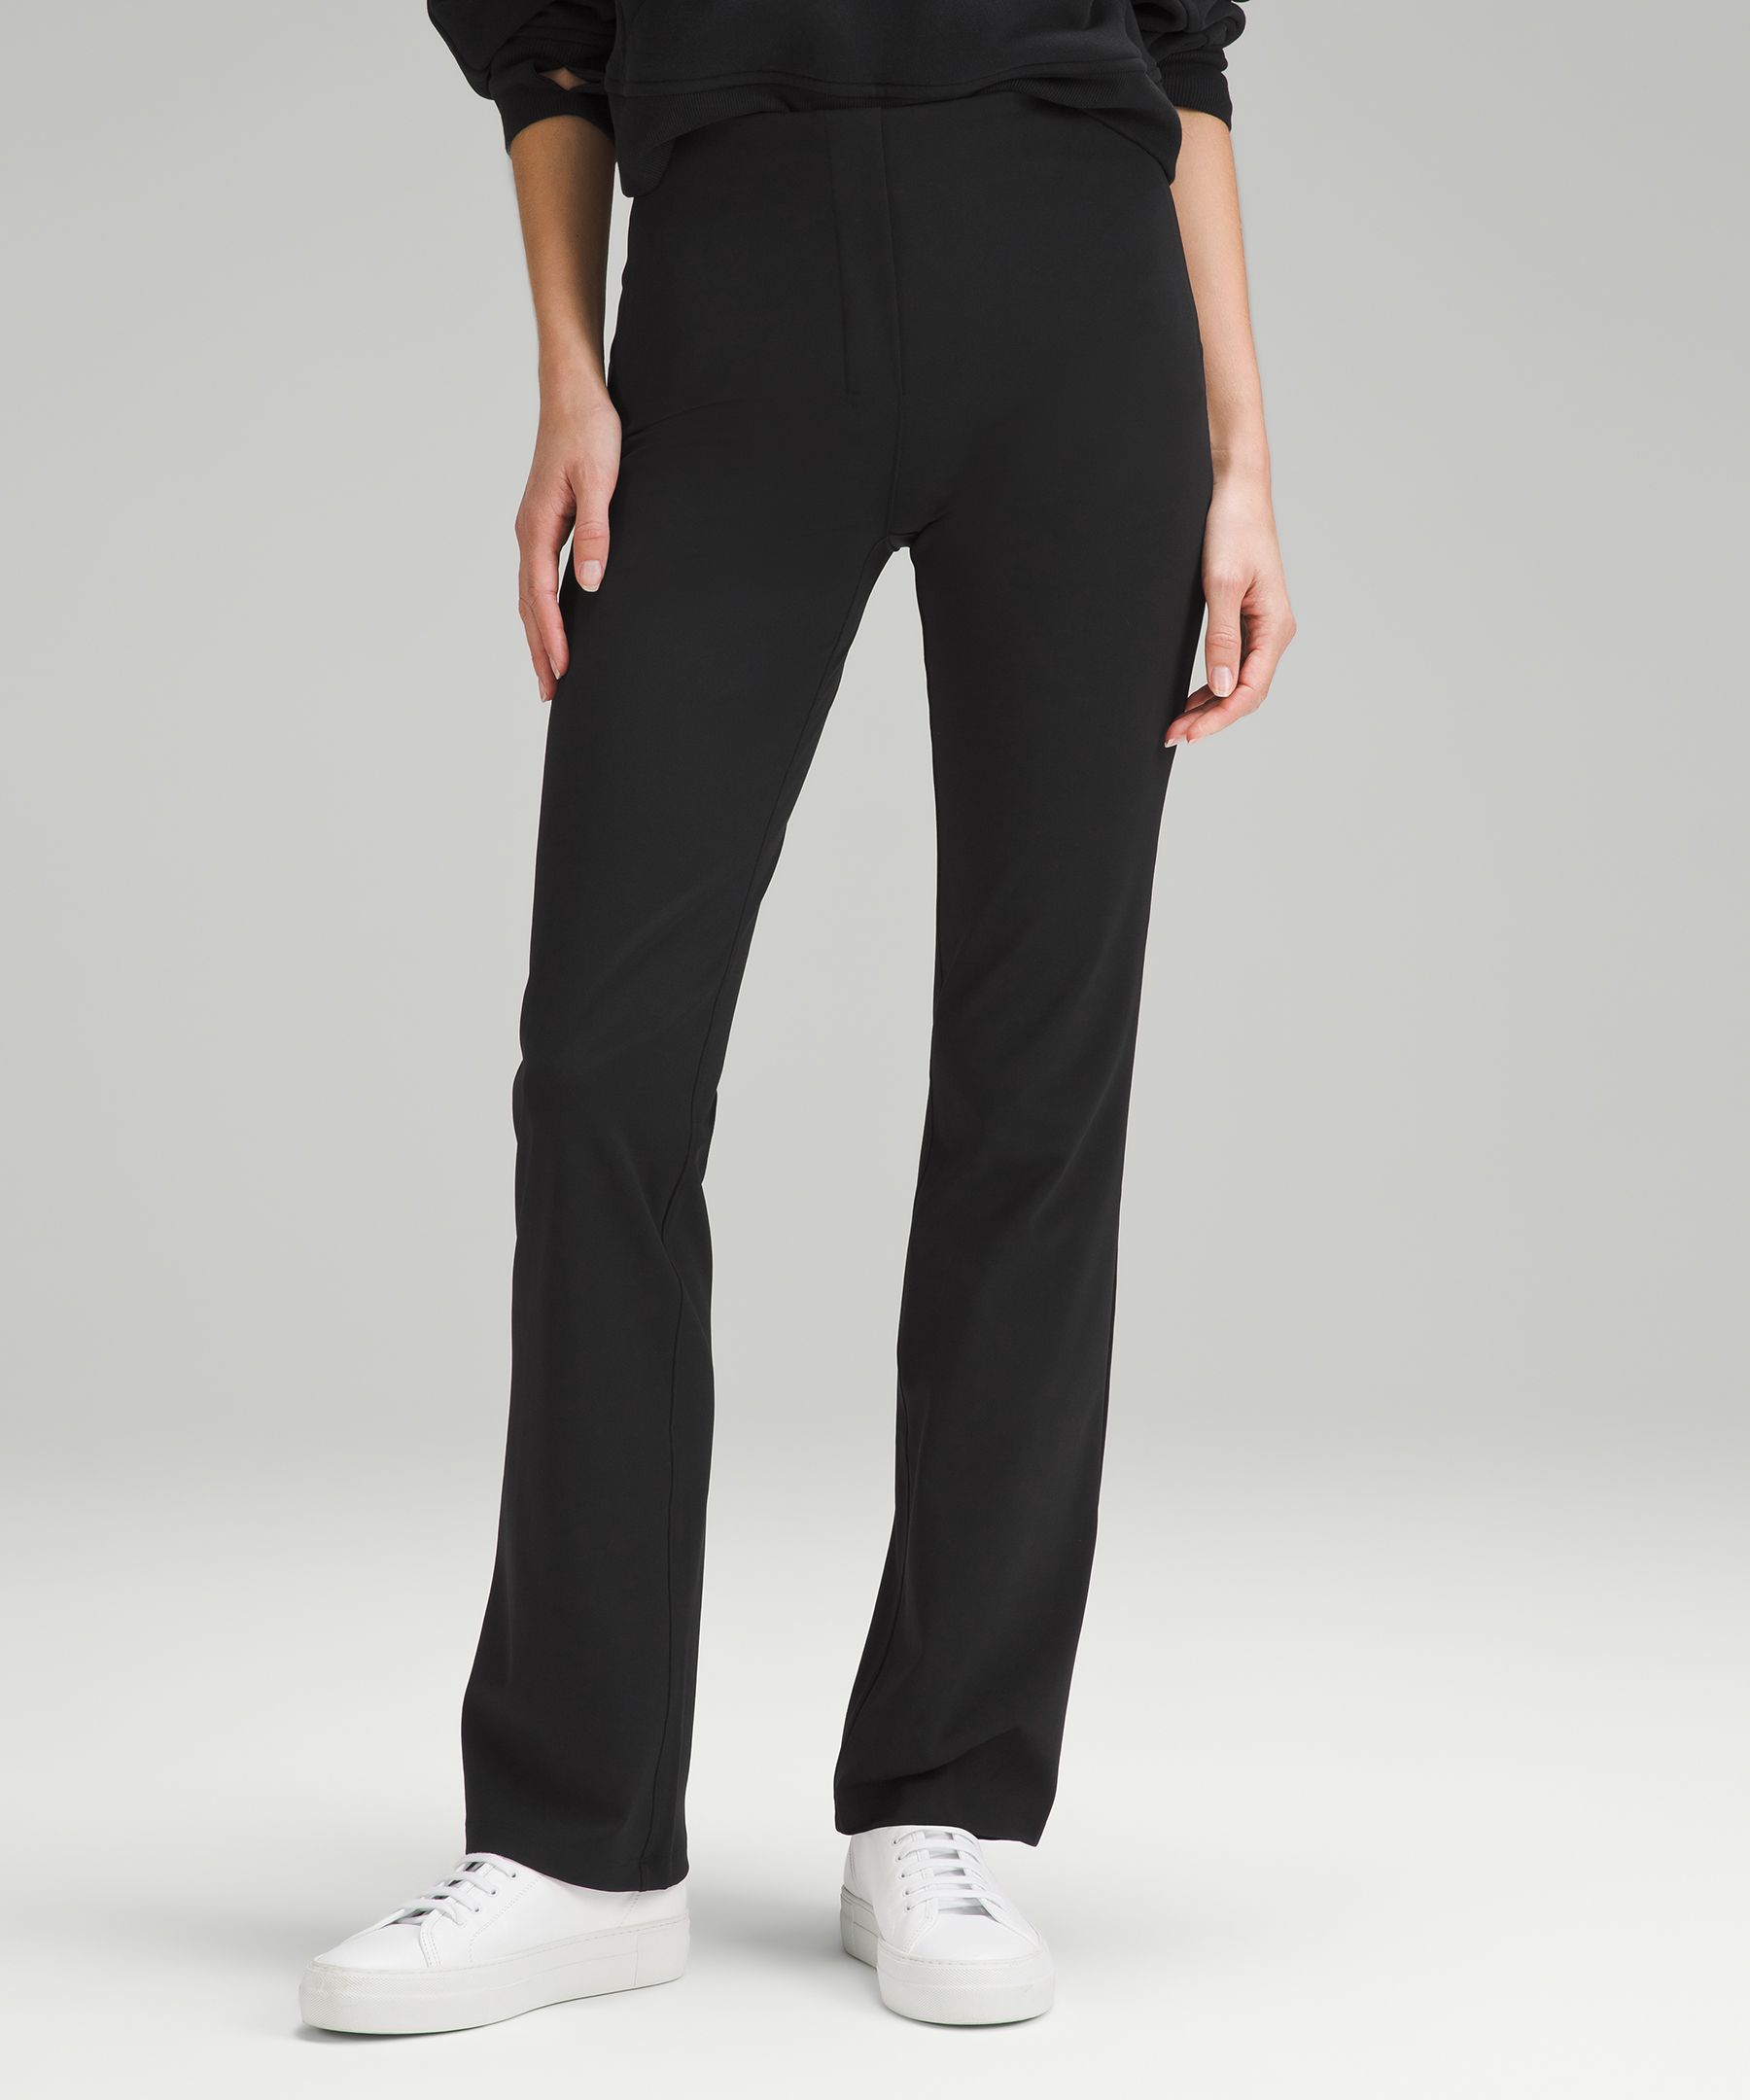 NWT, Lululemon, Smooth Fit High Rise Pull On Cropped Pant in Black, Size  12